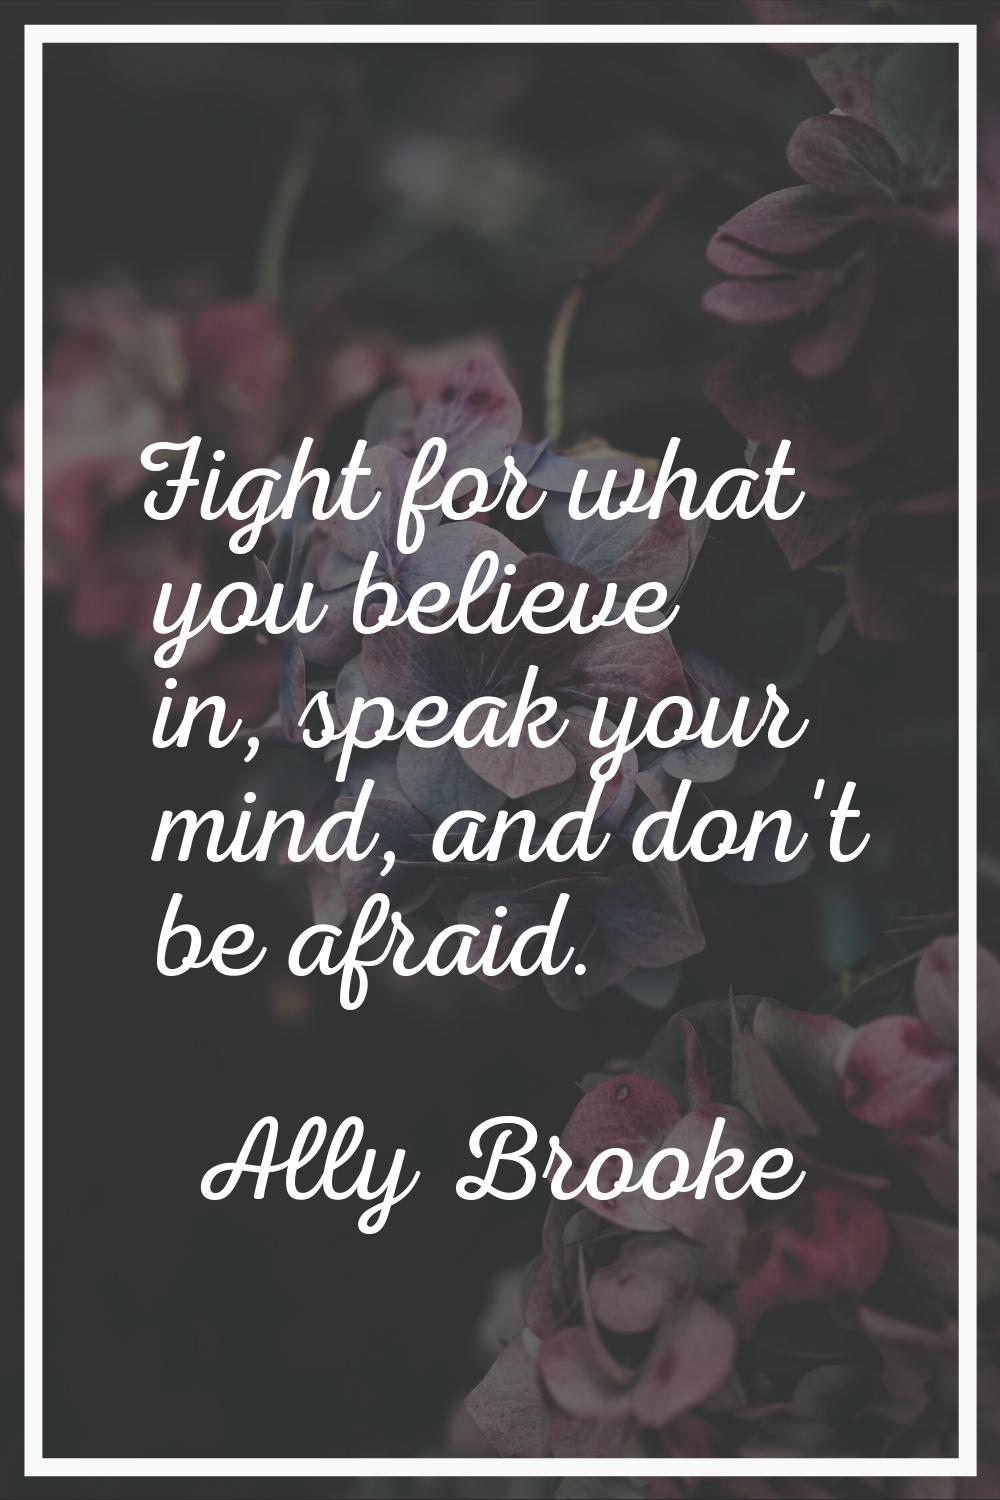 Fight for what you believe in, speak your mind, and don't be afraid.